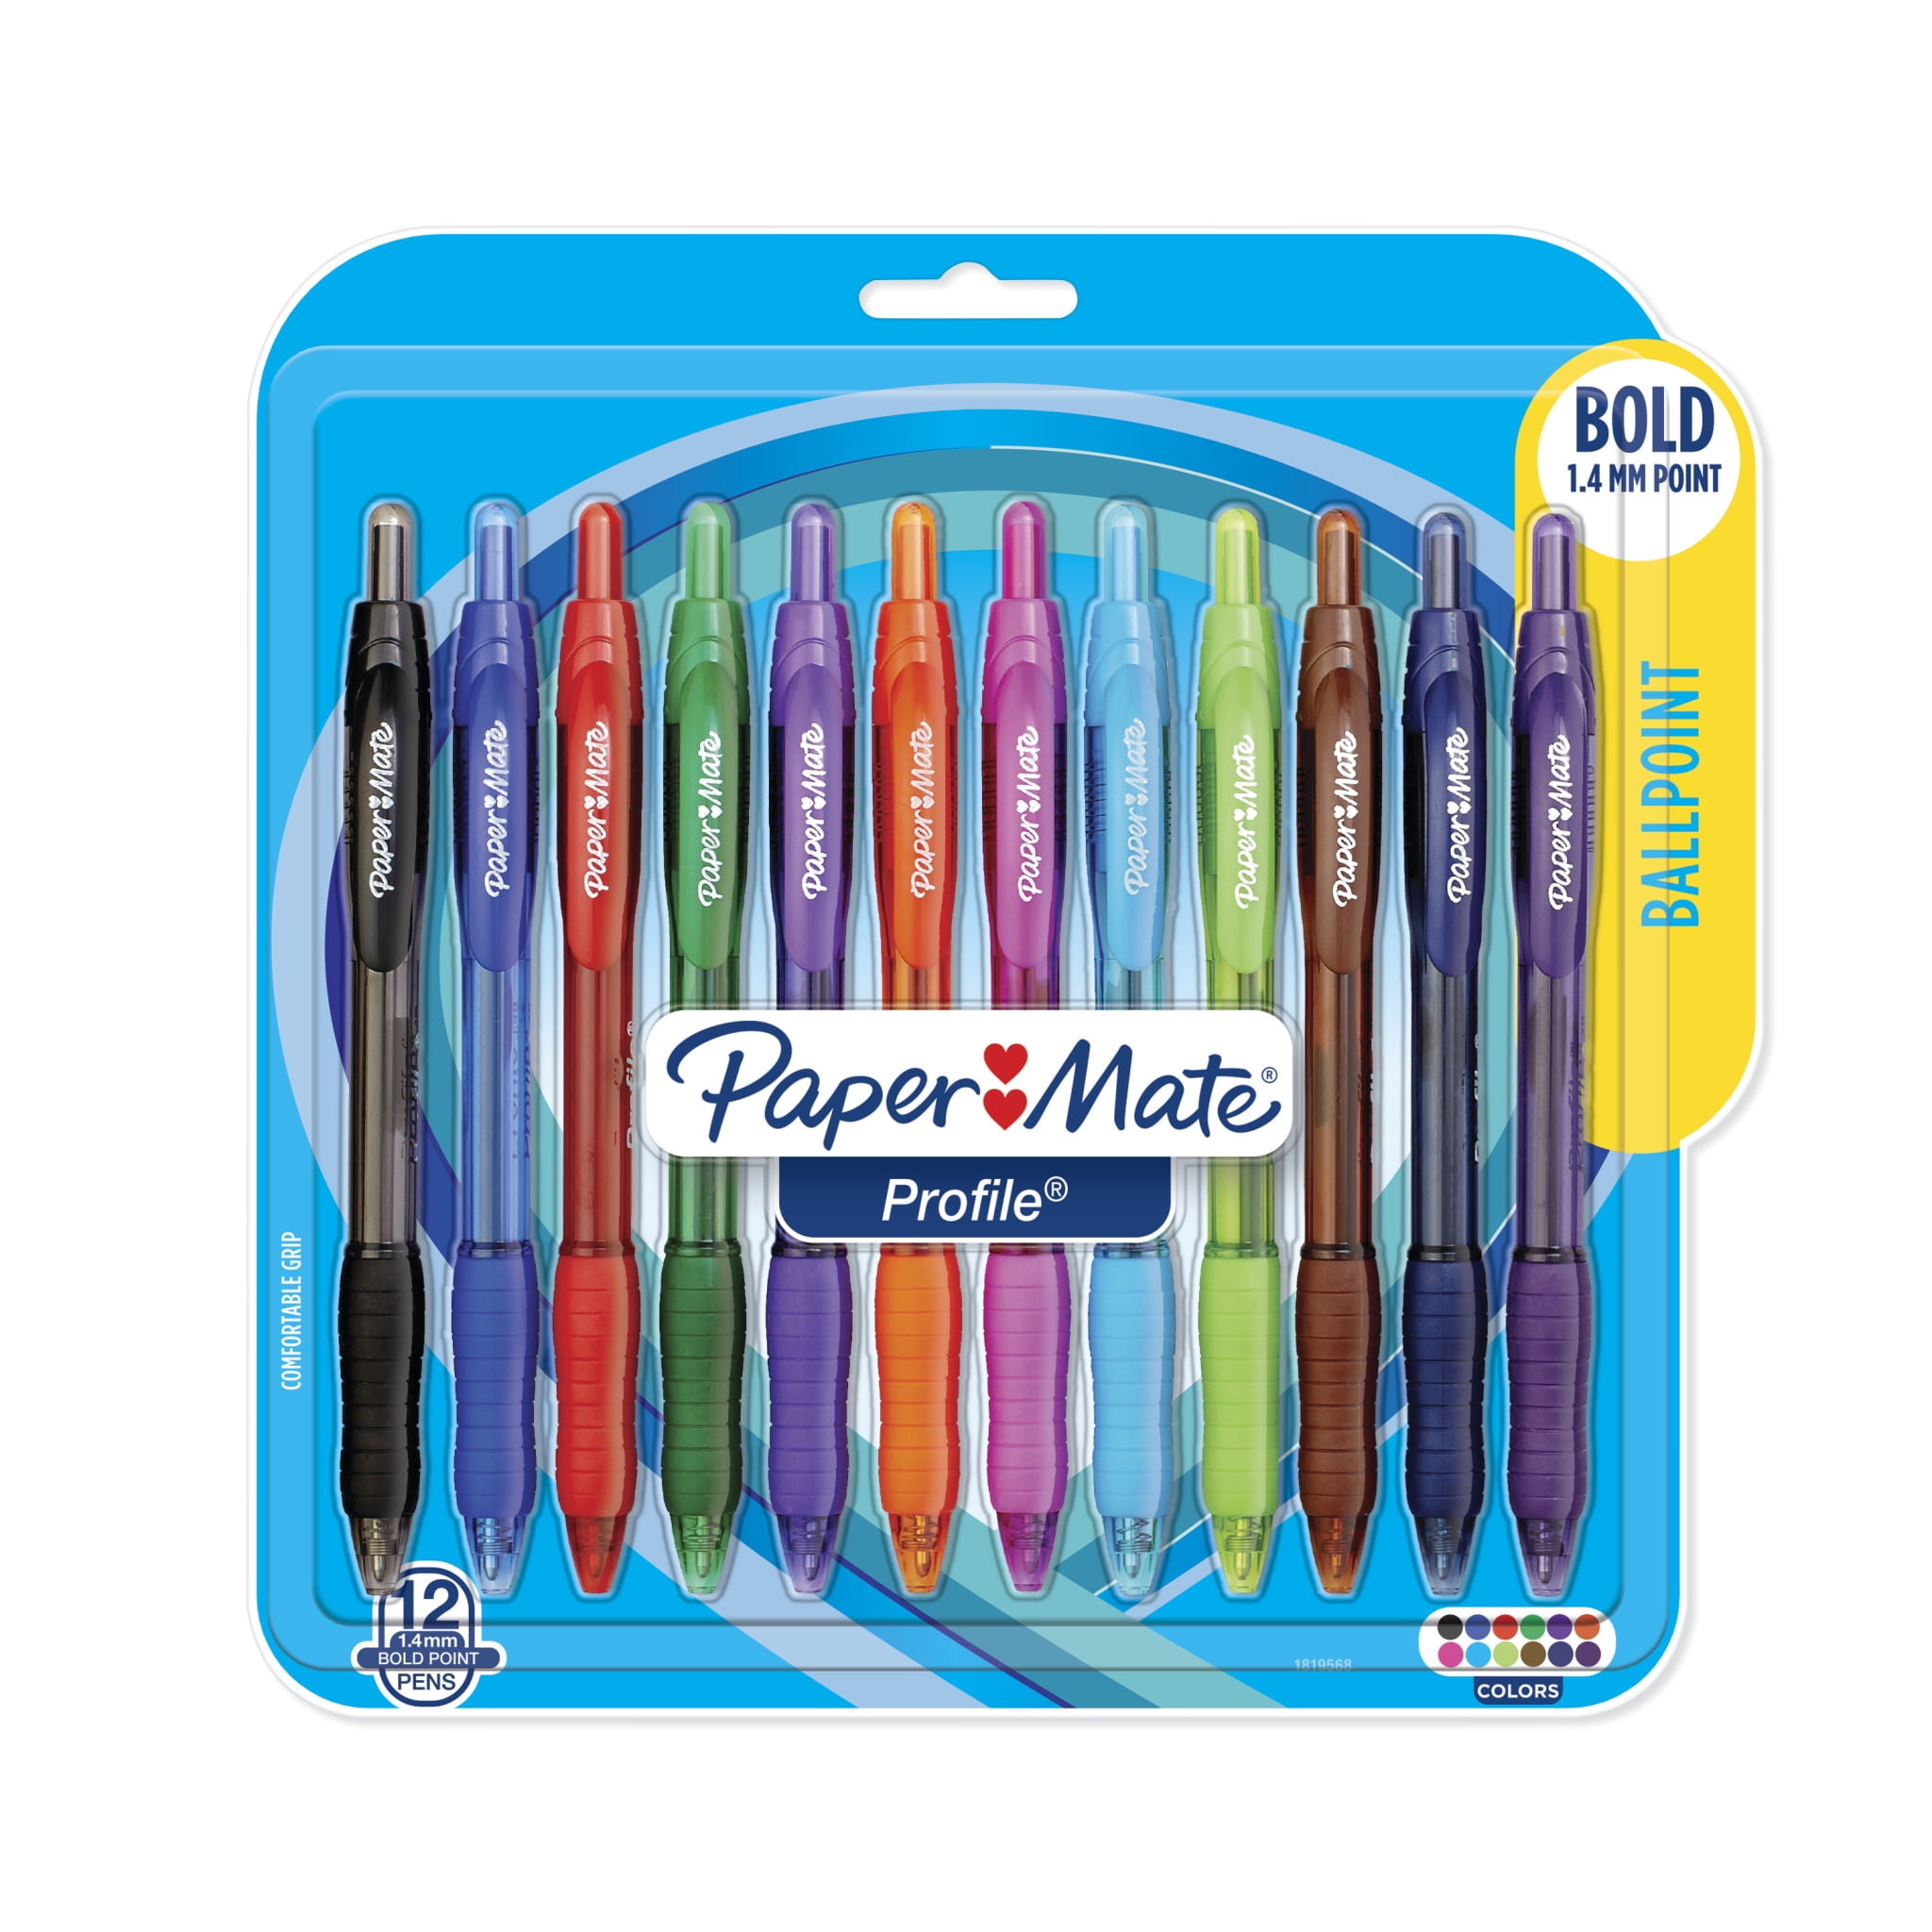 Papermate Profile Ballpoint Pen Teal Not Slim New  In Pack 